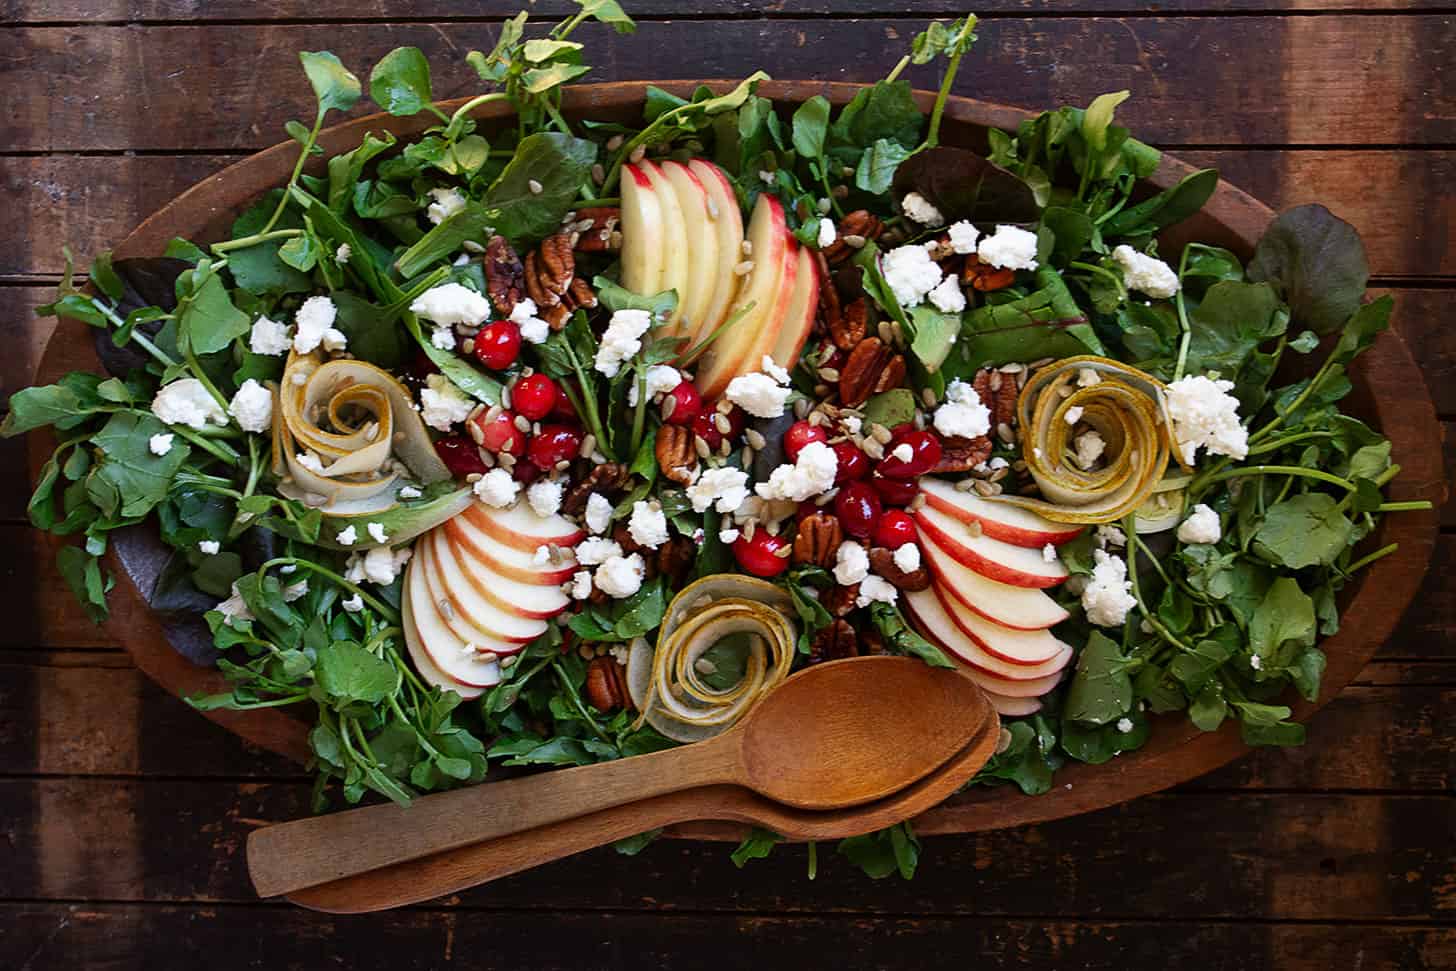 Fall harvest salad in wooden bowl with wooden spoons